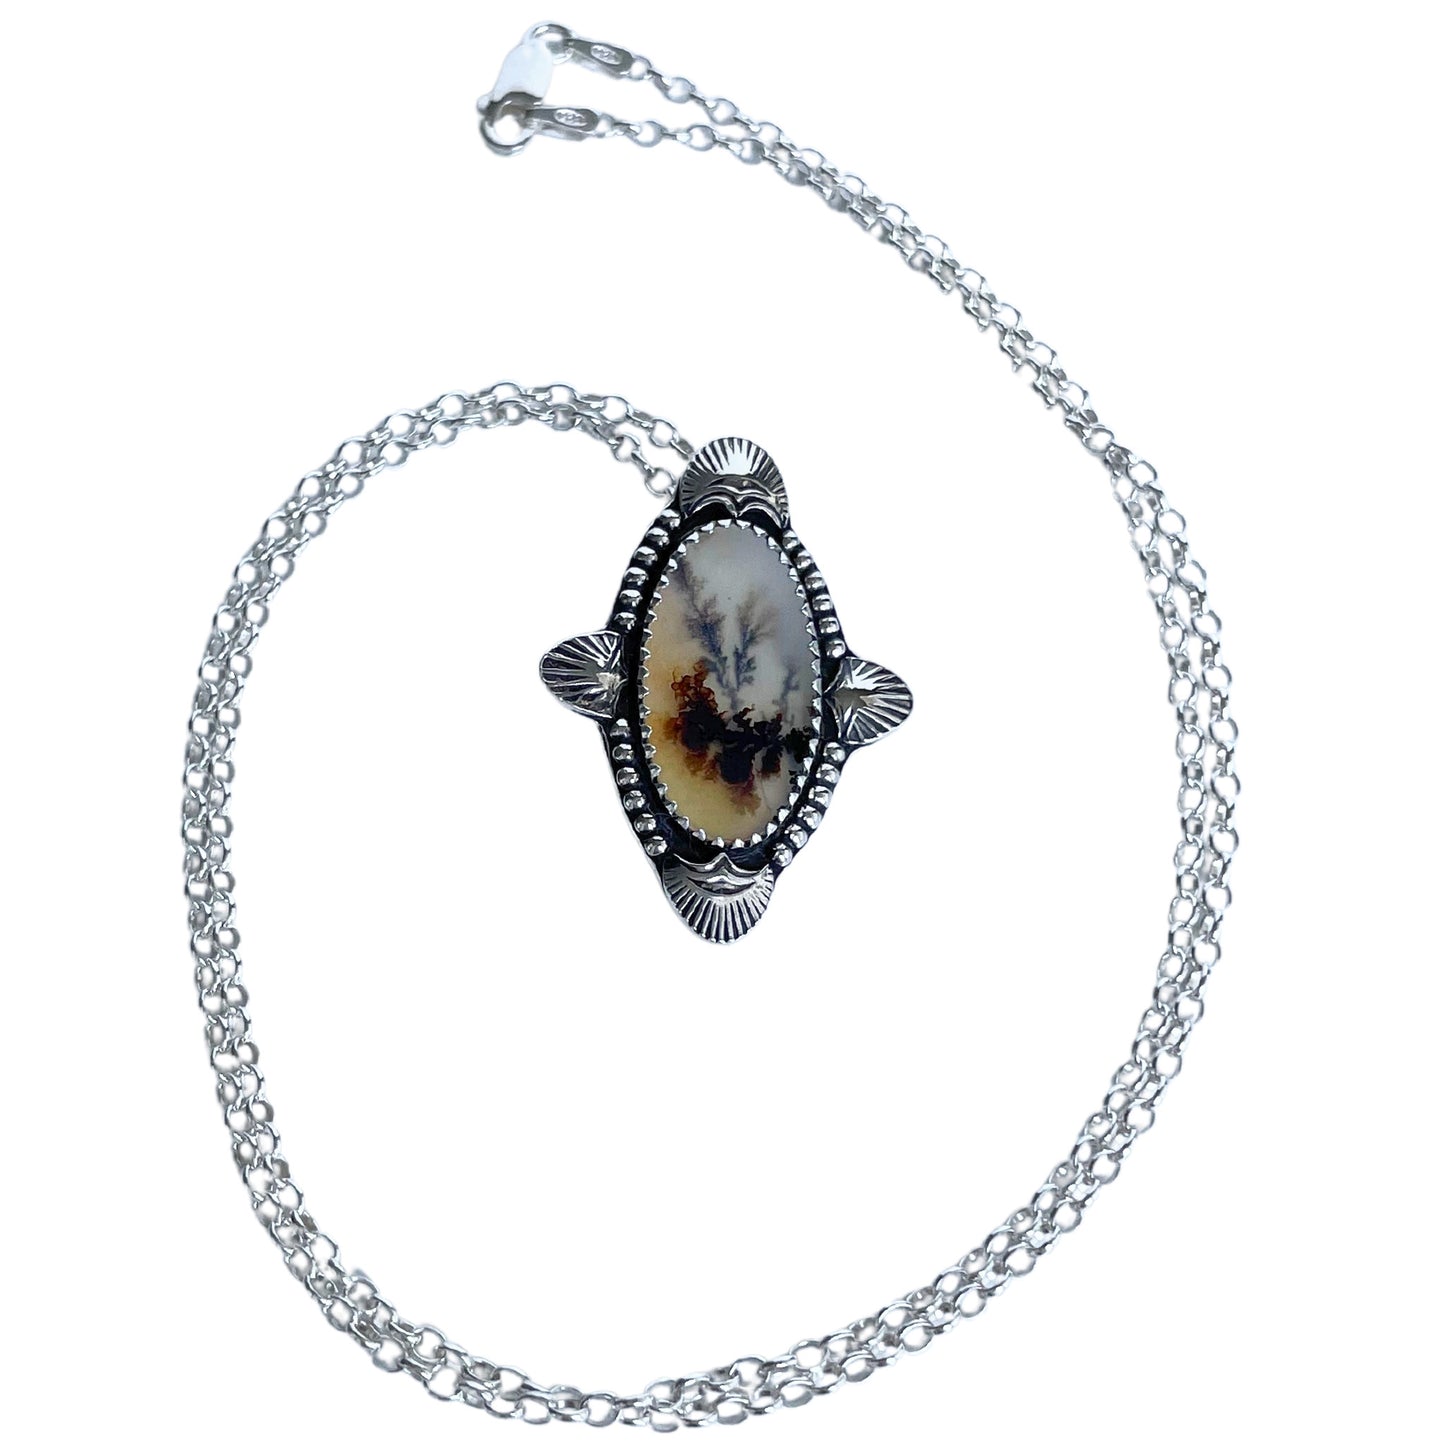 Dendritic Agate Sterling Silver Necklace - full view with chain.